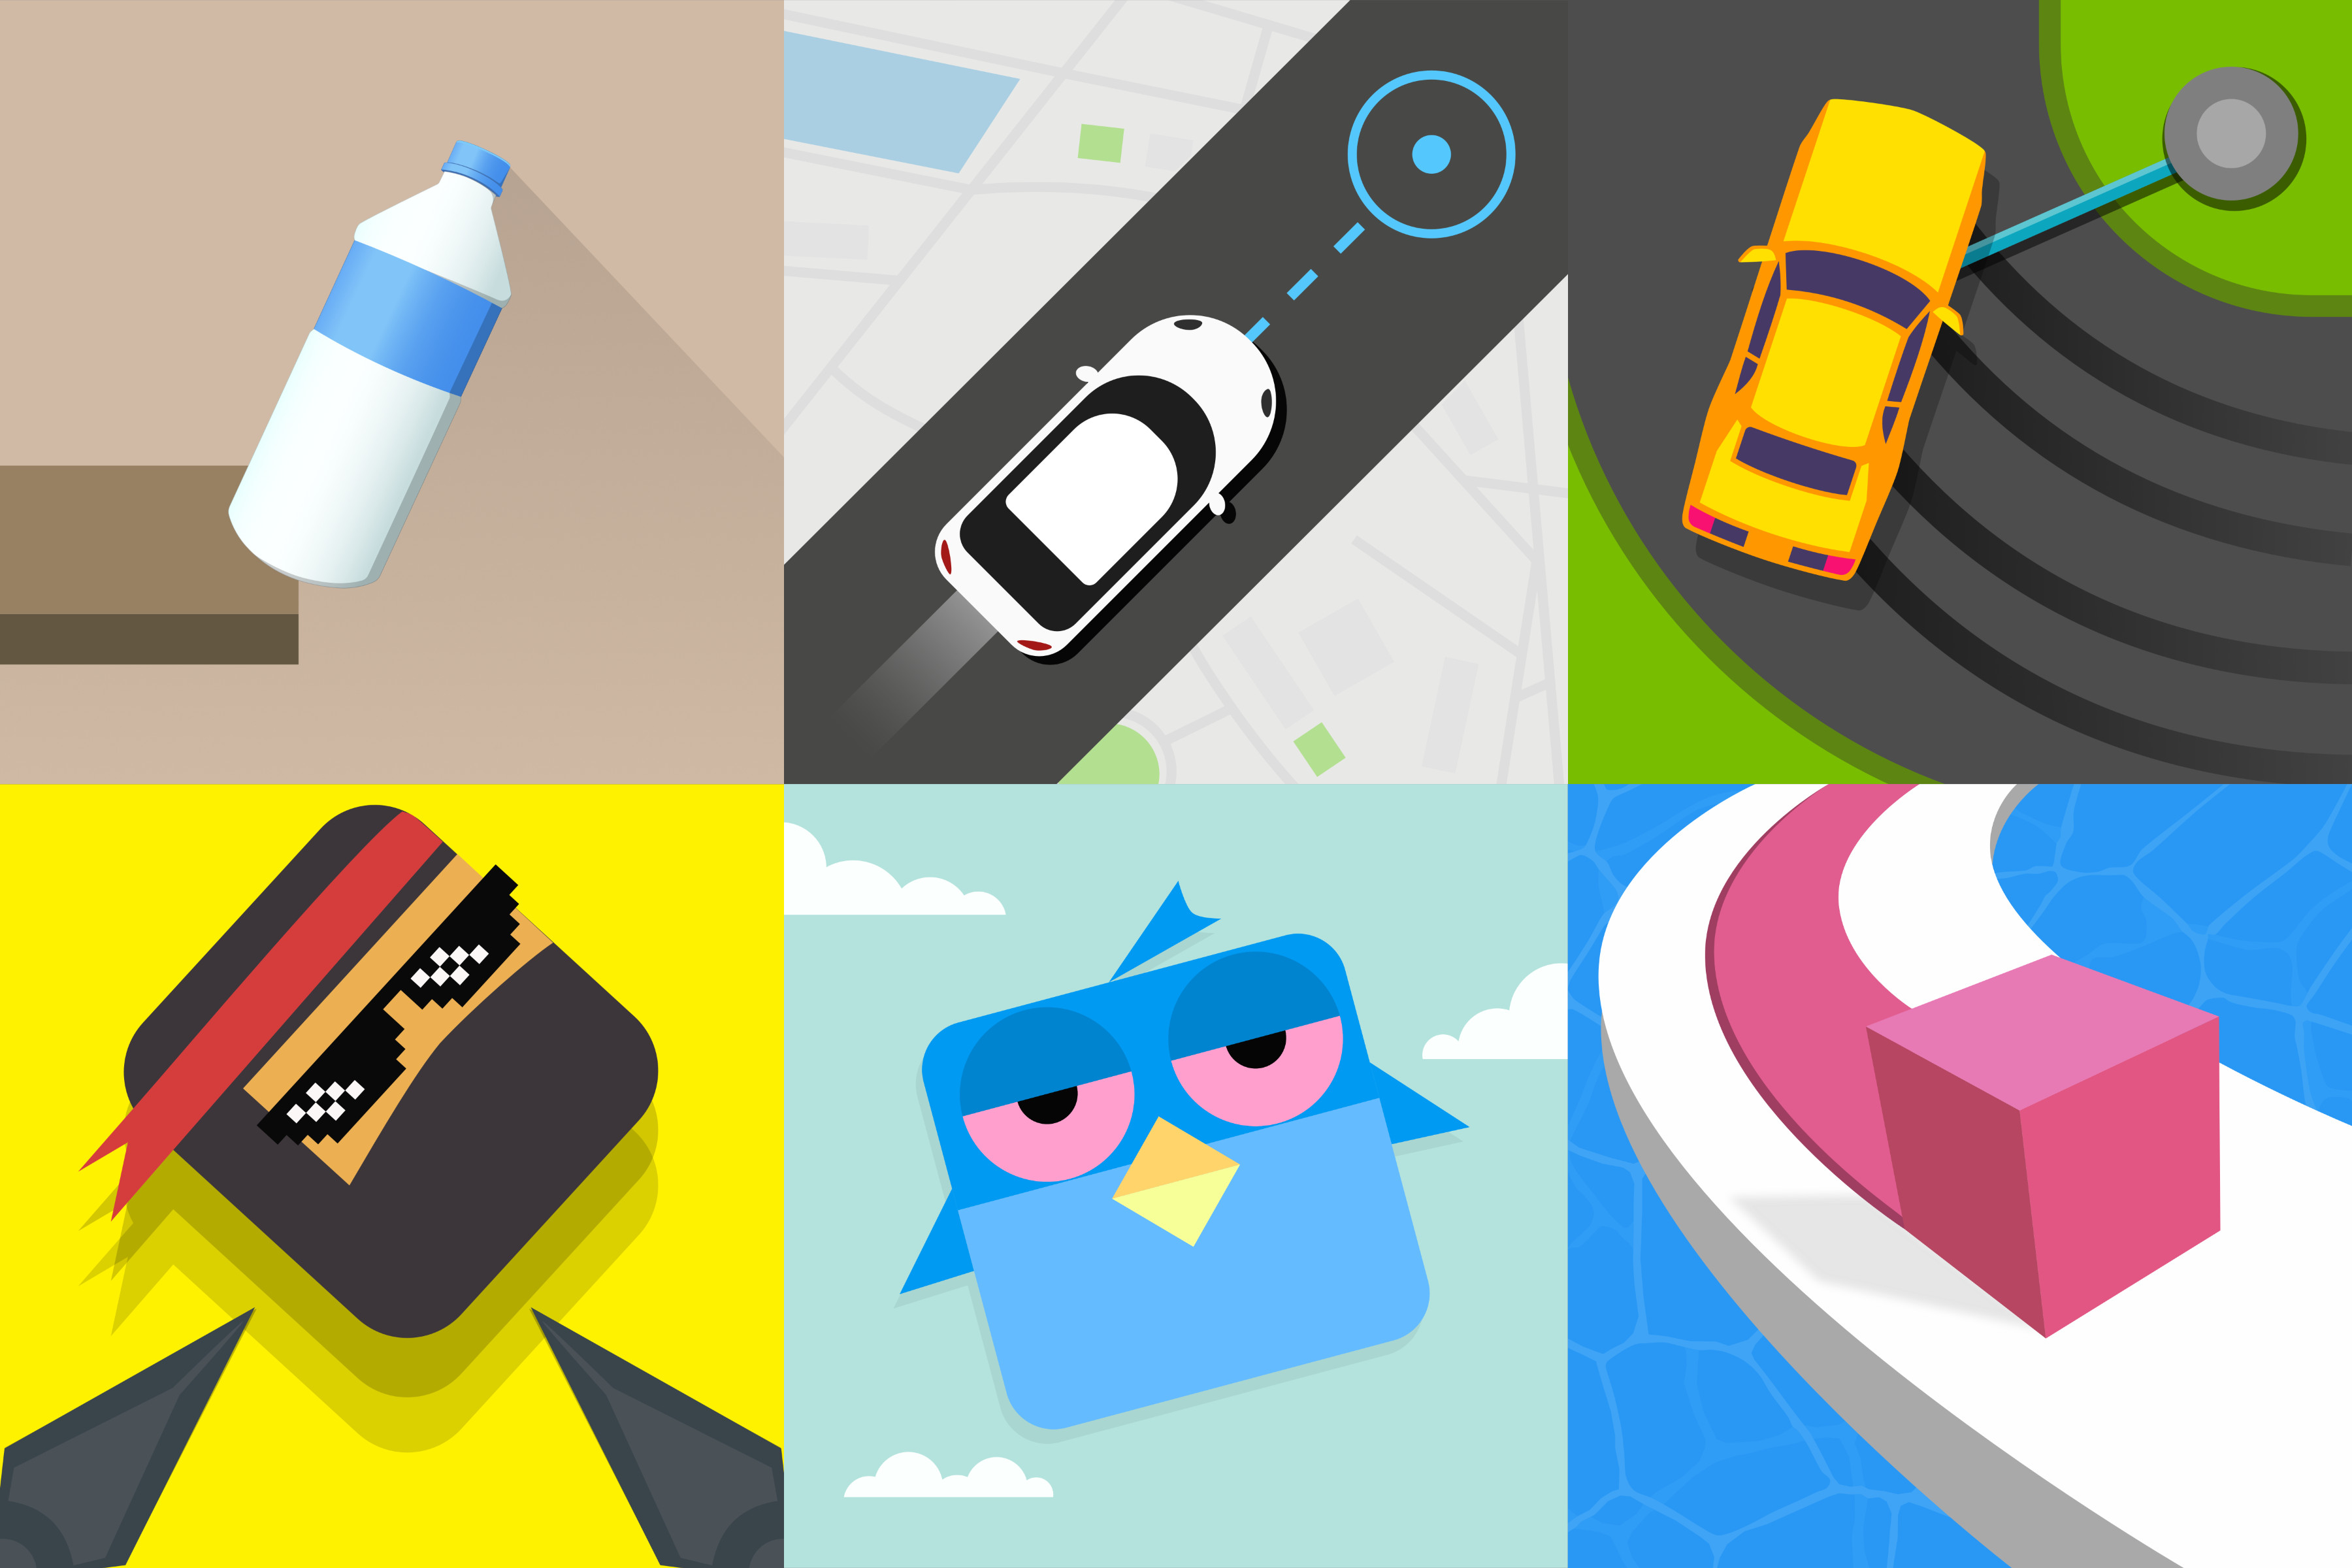 The vectorized game logos, top-left to bottom-right: Bottle Flip 3D!, Pick Me Up, Sling Drift, Swaggy Ninja, Dooby Bird, Line Color 3D
Made in Affinity Designer.